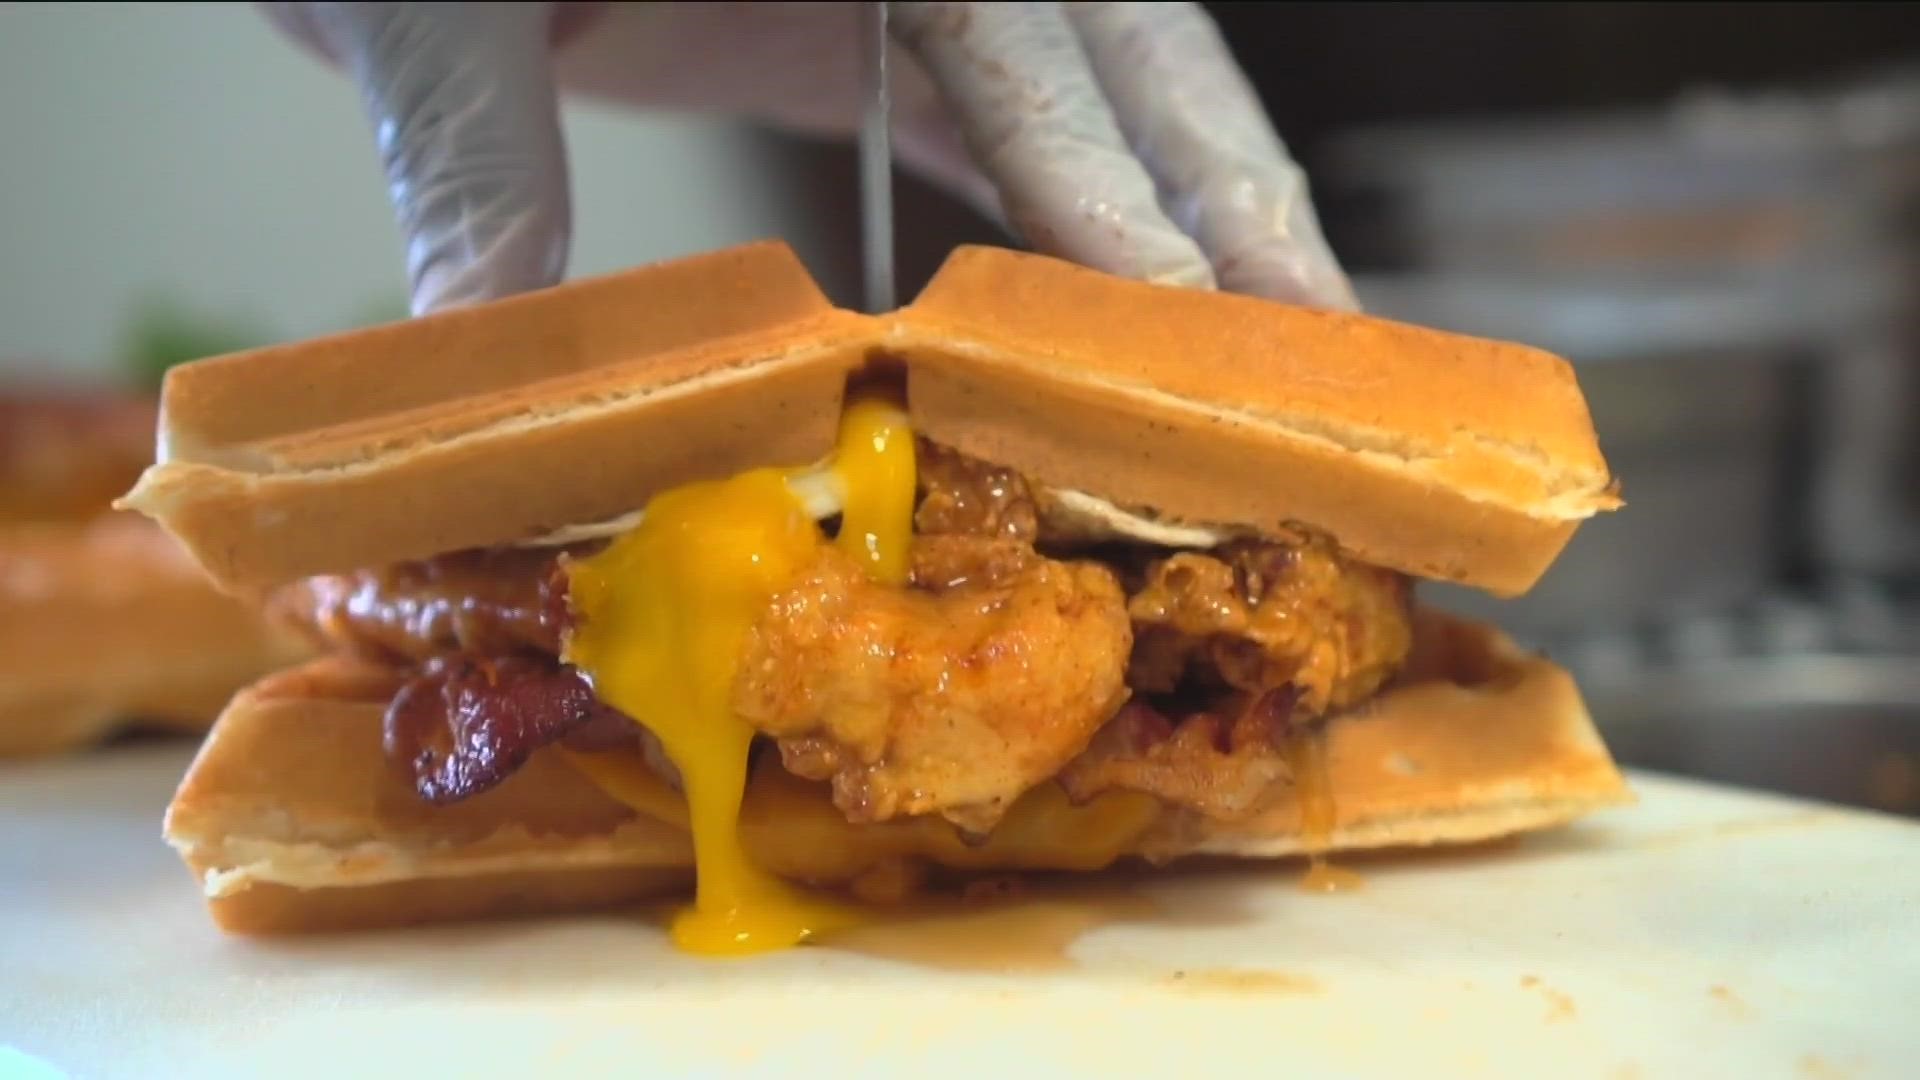 Rhythm's Chicken & Waffles is a family-run business. They were on the "Fresh, Fried and Crispy" Netflix series. The restaurant is located in Pacific Beach.